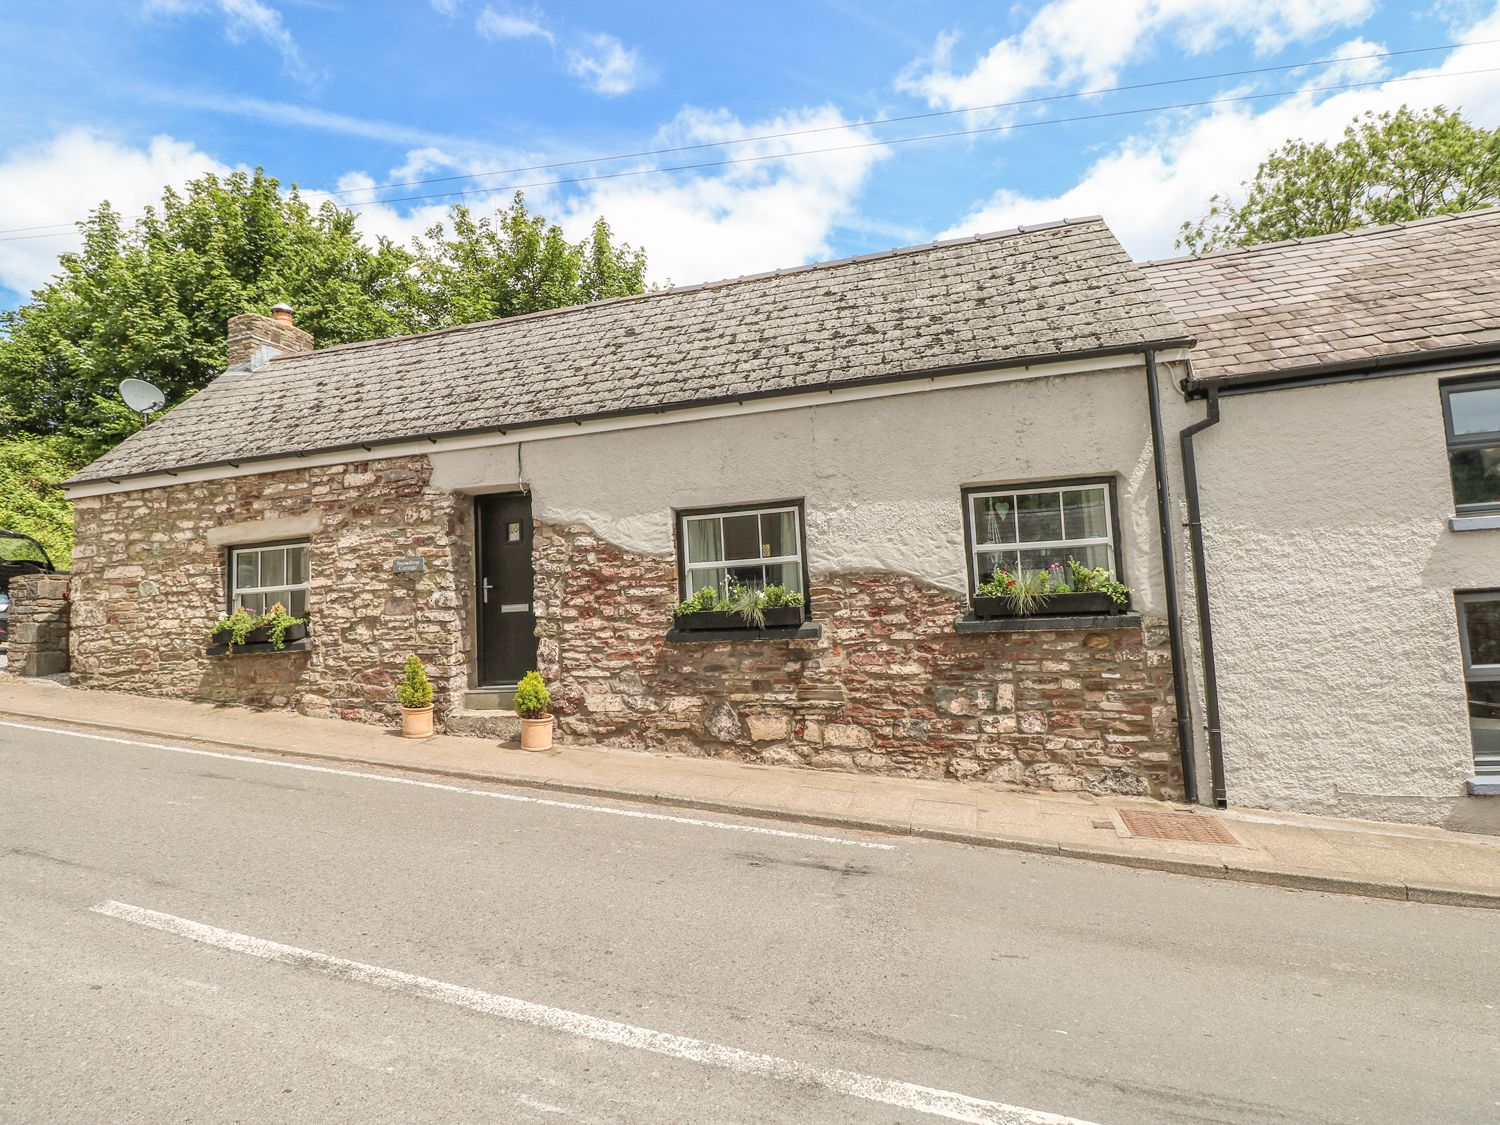 Snowdrop Cottage - South Wales - 949428 - photo 1